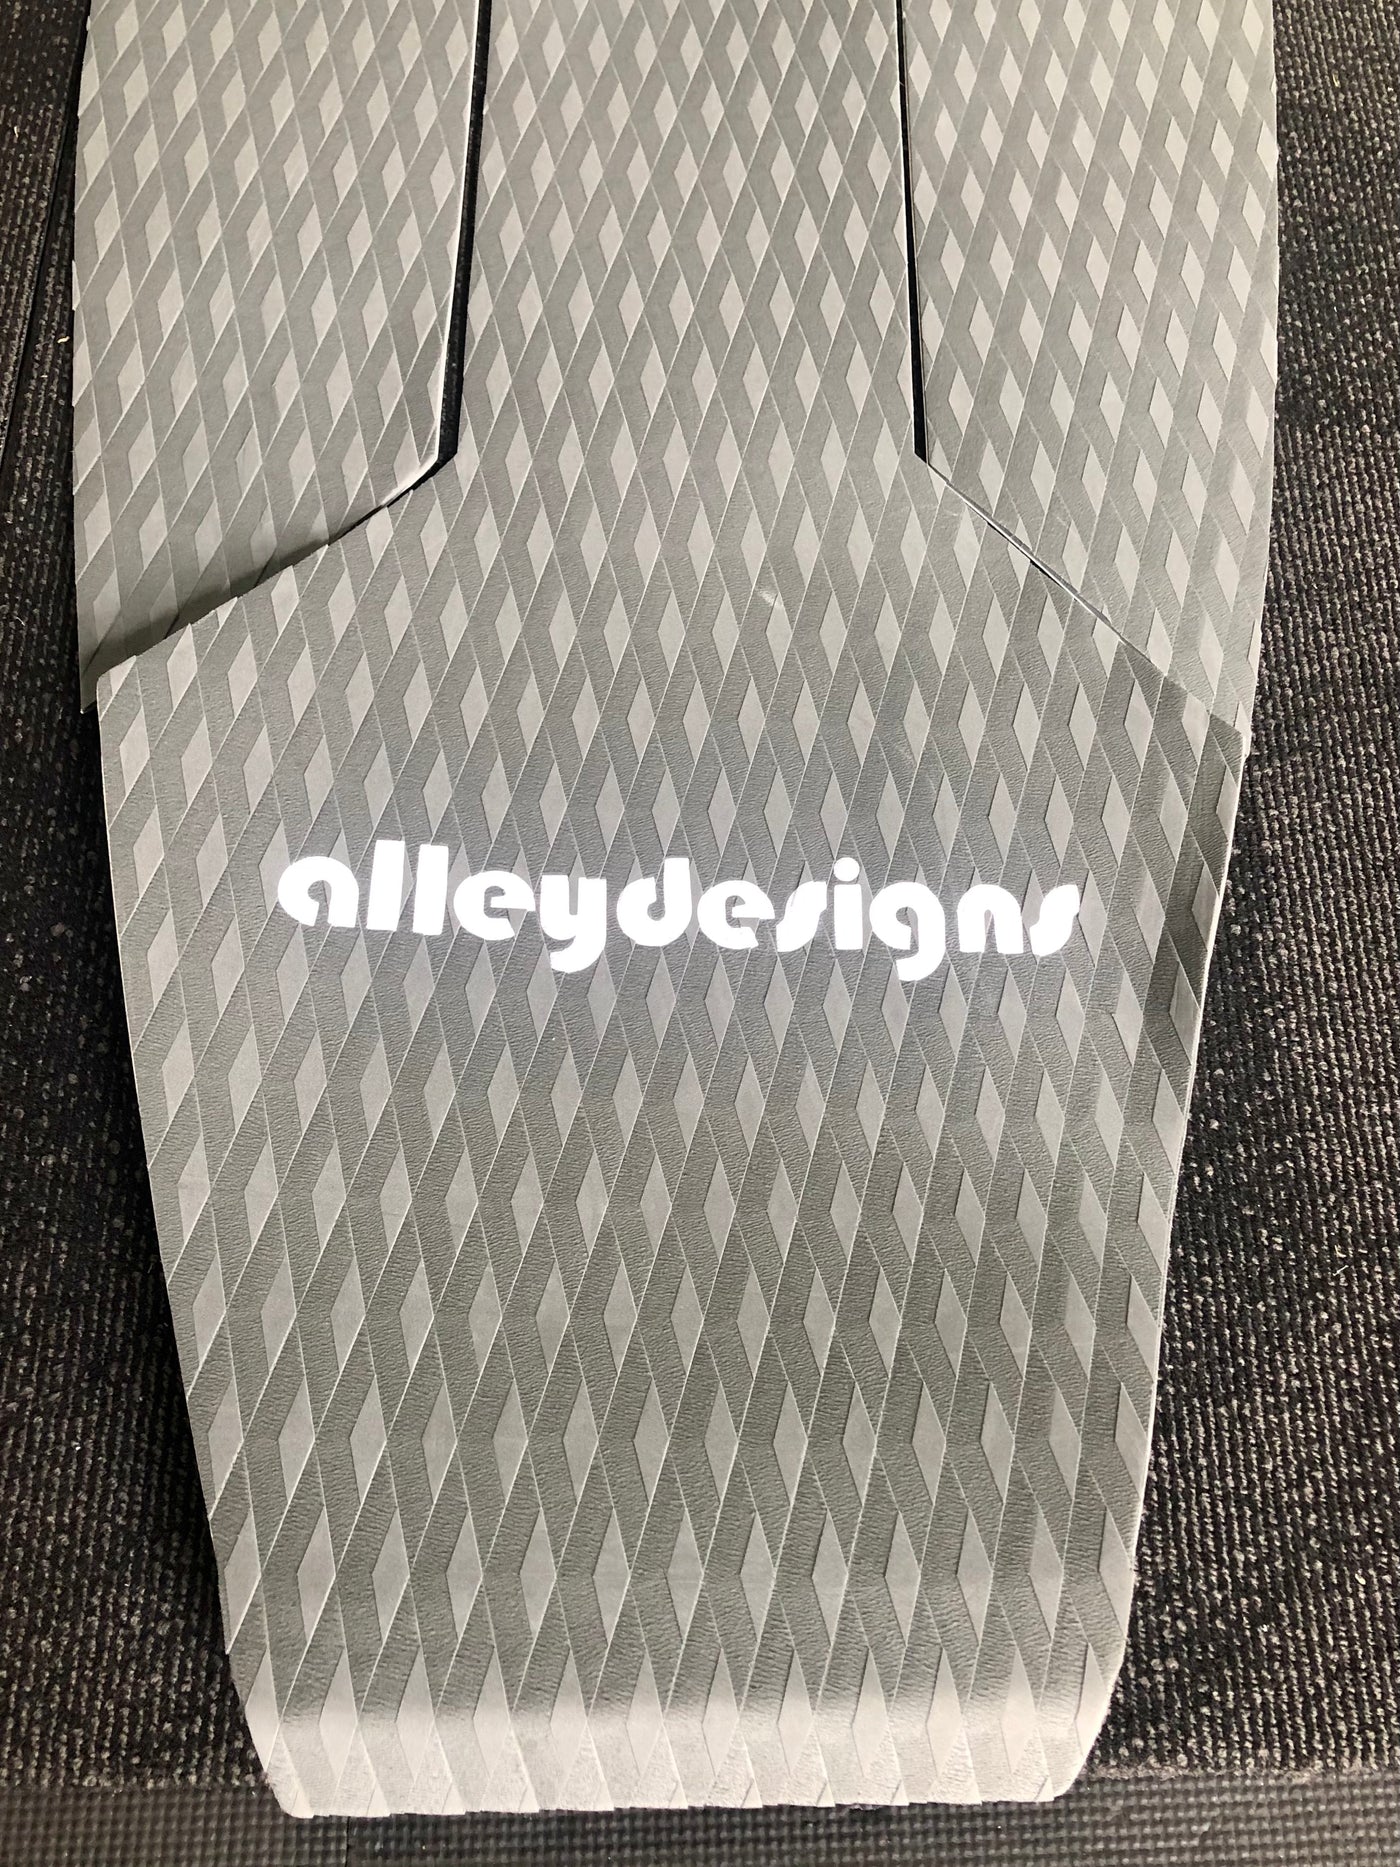 Deck Pad Grey Full Length 3 Pieces, Free Shipping - Alleydesigns  Pty Ltd                                             ABN: 44165571264